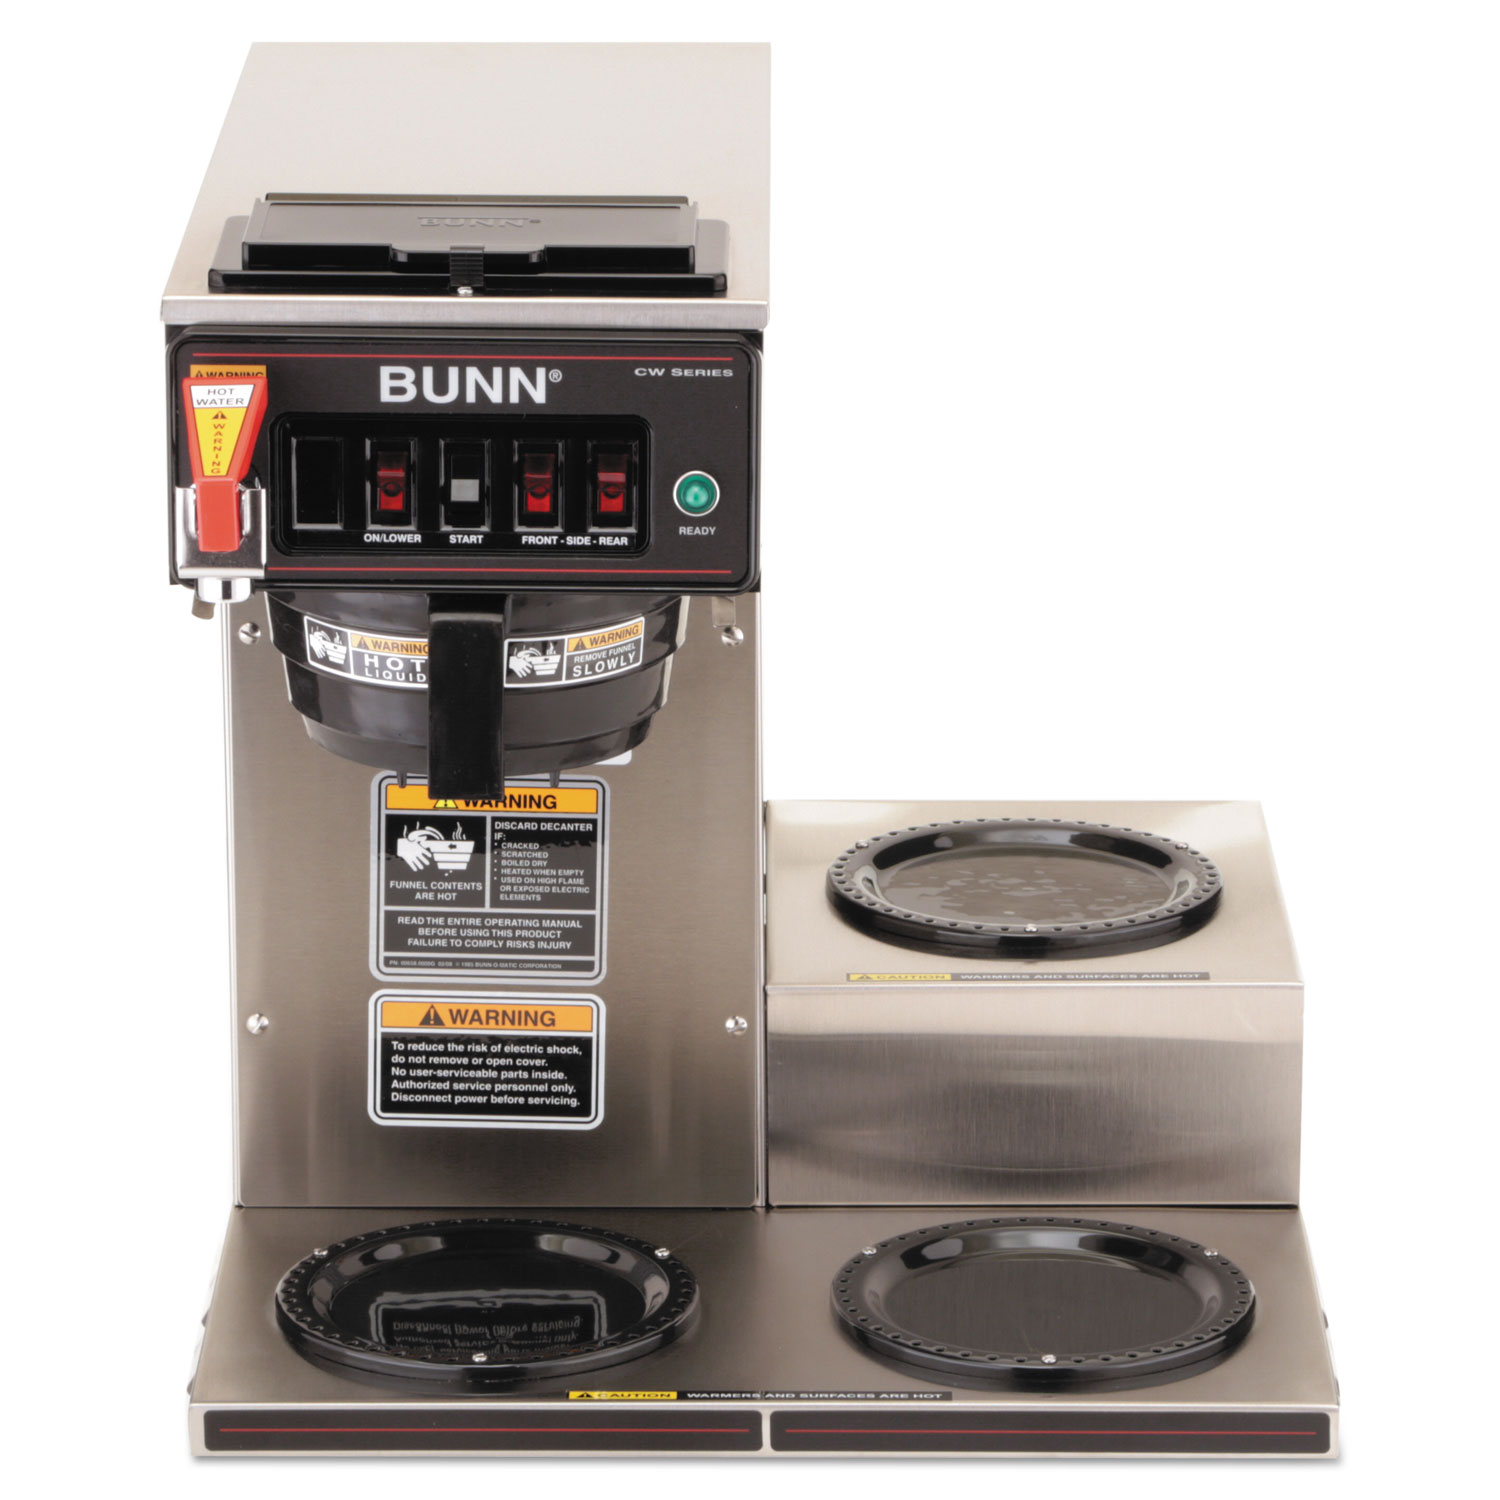 CWTF-3 Three Burner Automatic Coffee Brewer, Stainless Steel, Black